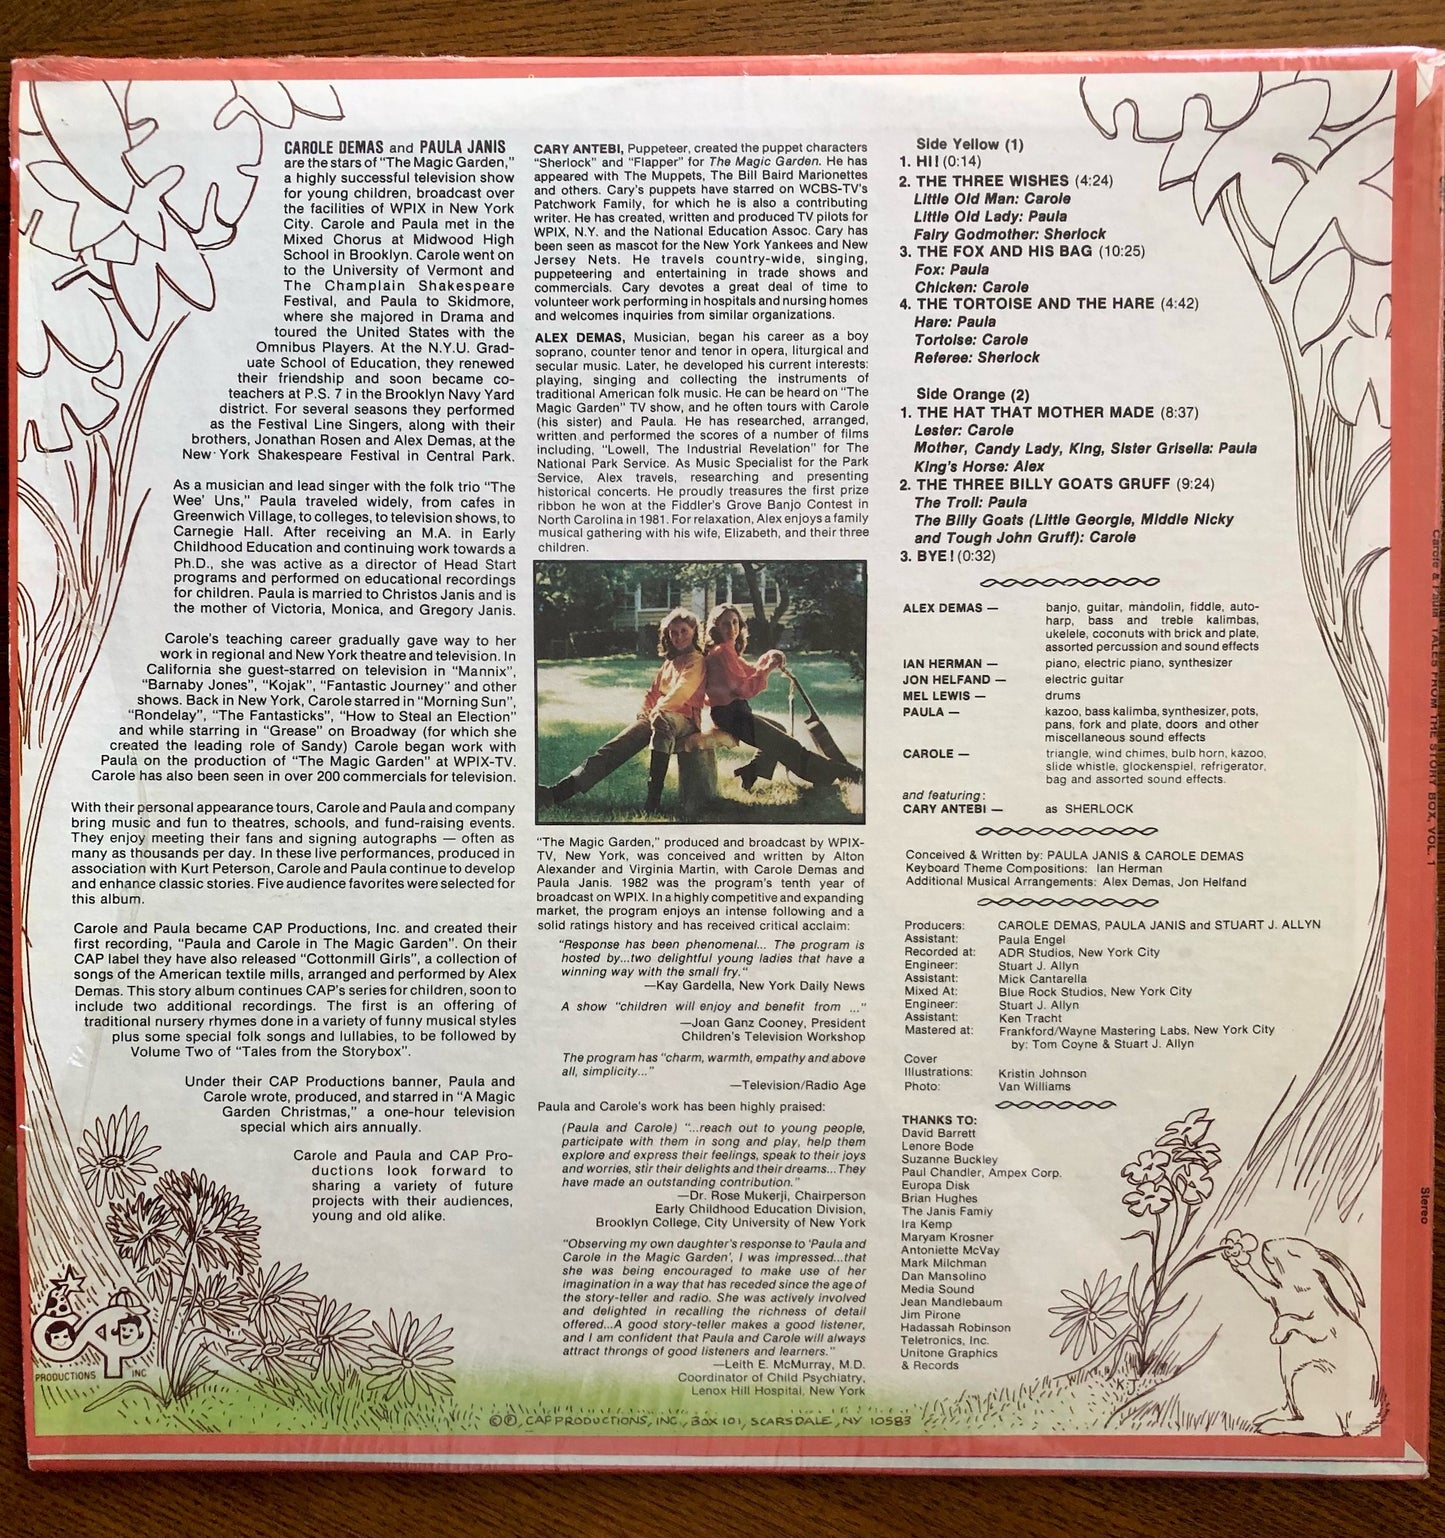 Tales From The Story Box, 1982 Vinyl Cast Album